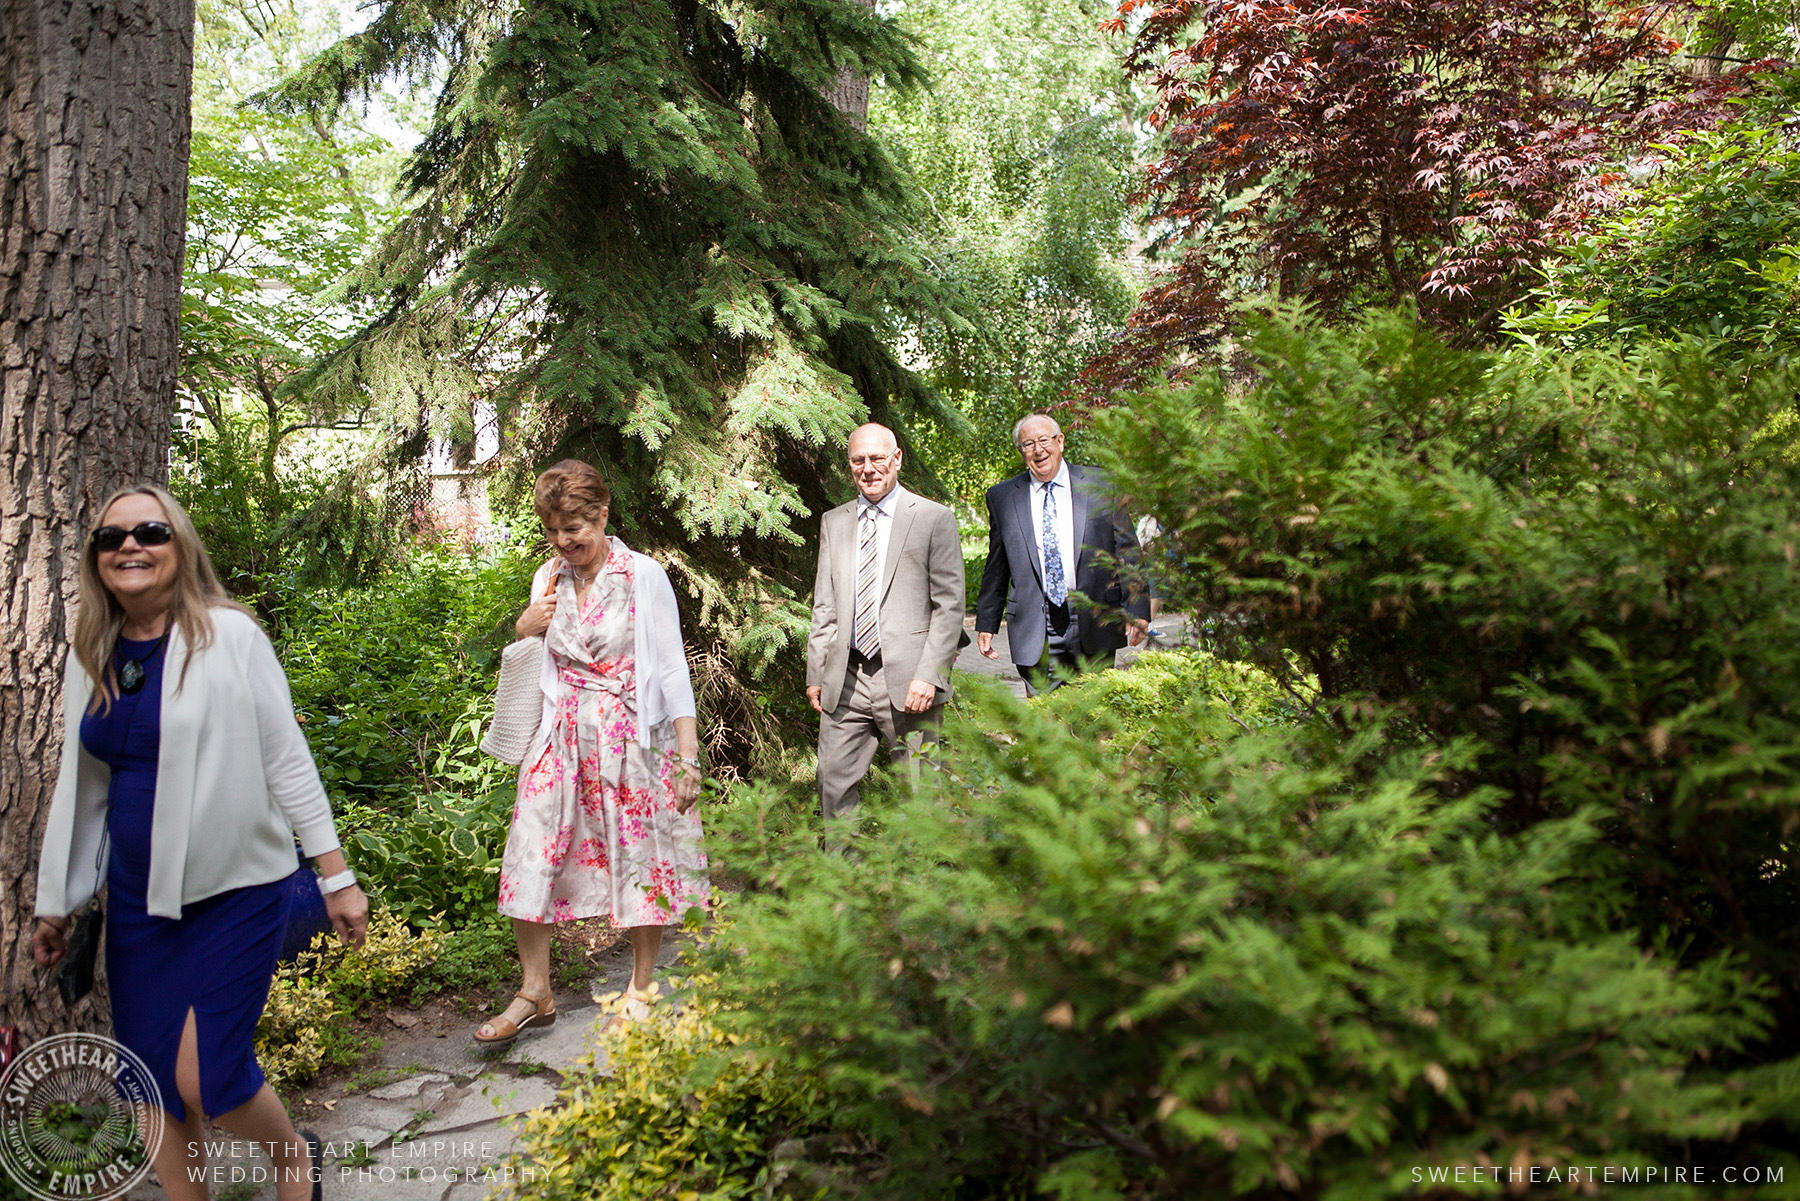 Guests arriving for the wedding, Toronto Island Elopement